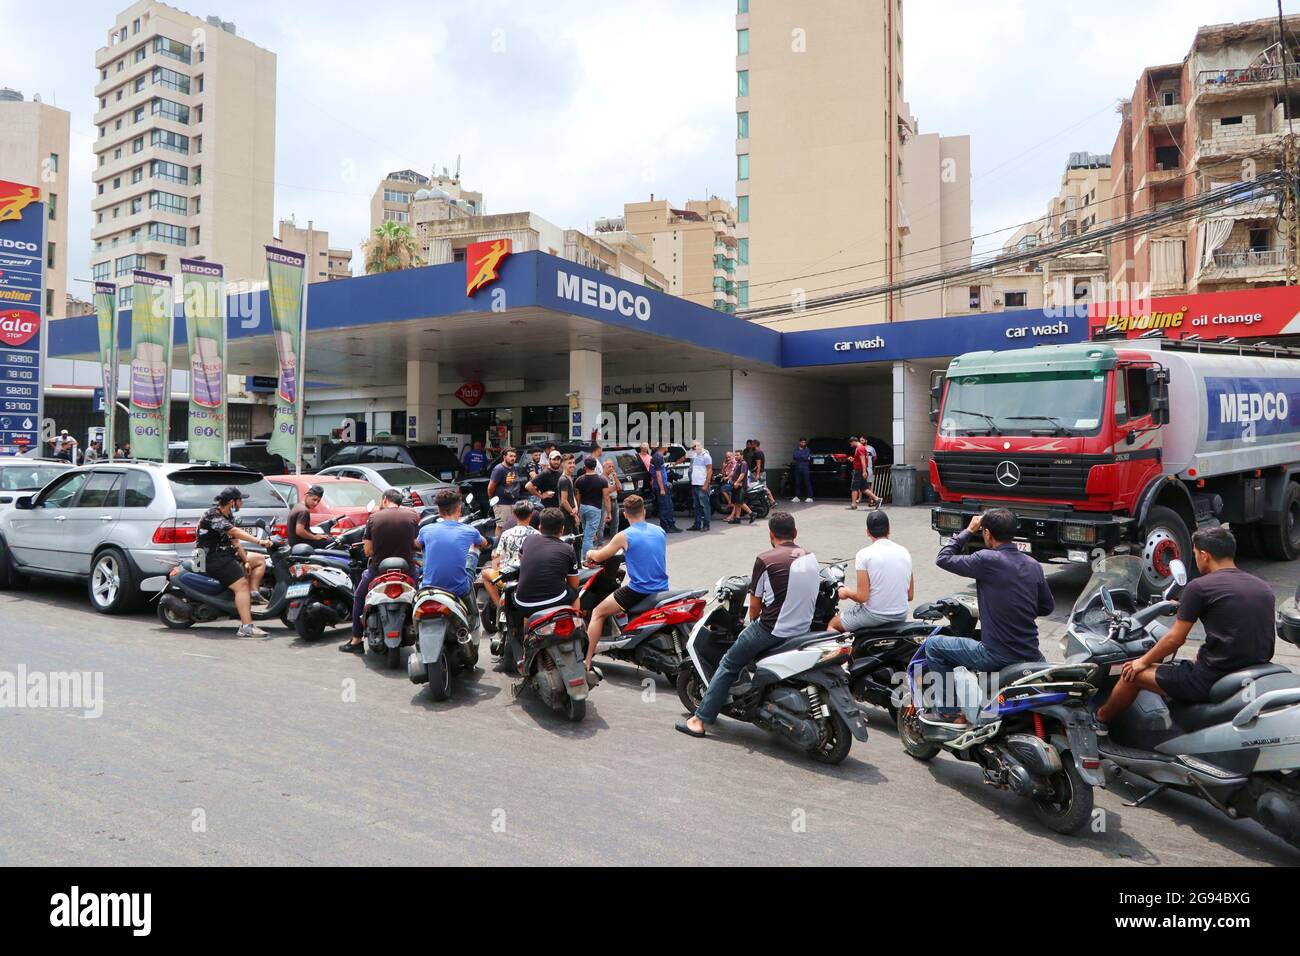 Beirut, Lebanon. 23rd July, 2021. Clients queue at a petrol station in Beirut, Lebanon, on July 23, 2021.Due to the lack of fuel, petrol stations in Lebanon currently can't serve the needs of all customers and people use to sleep at night in their cars waiting for the opening of stations. According the newspaper L'orient le jour, in the night between July 23 and 24 a truck hit some cars queueing at a petrol station in Beirut, killing a person and injurying three others. (Photo by Elisa Gestri/Sipa USA) Credit: Sipa USA/Alamy Live News Stock Photo